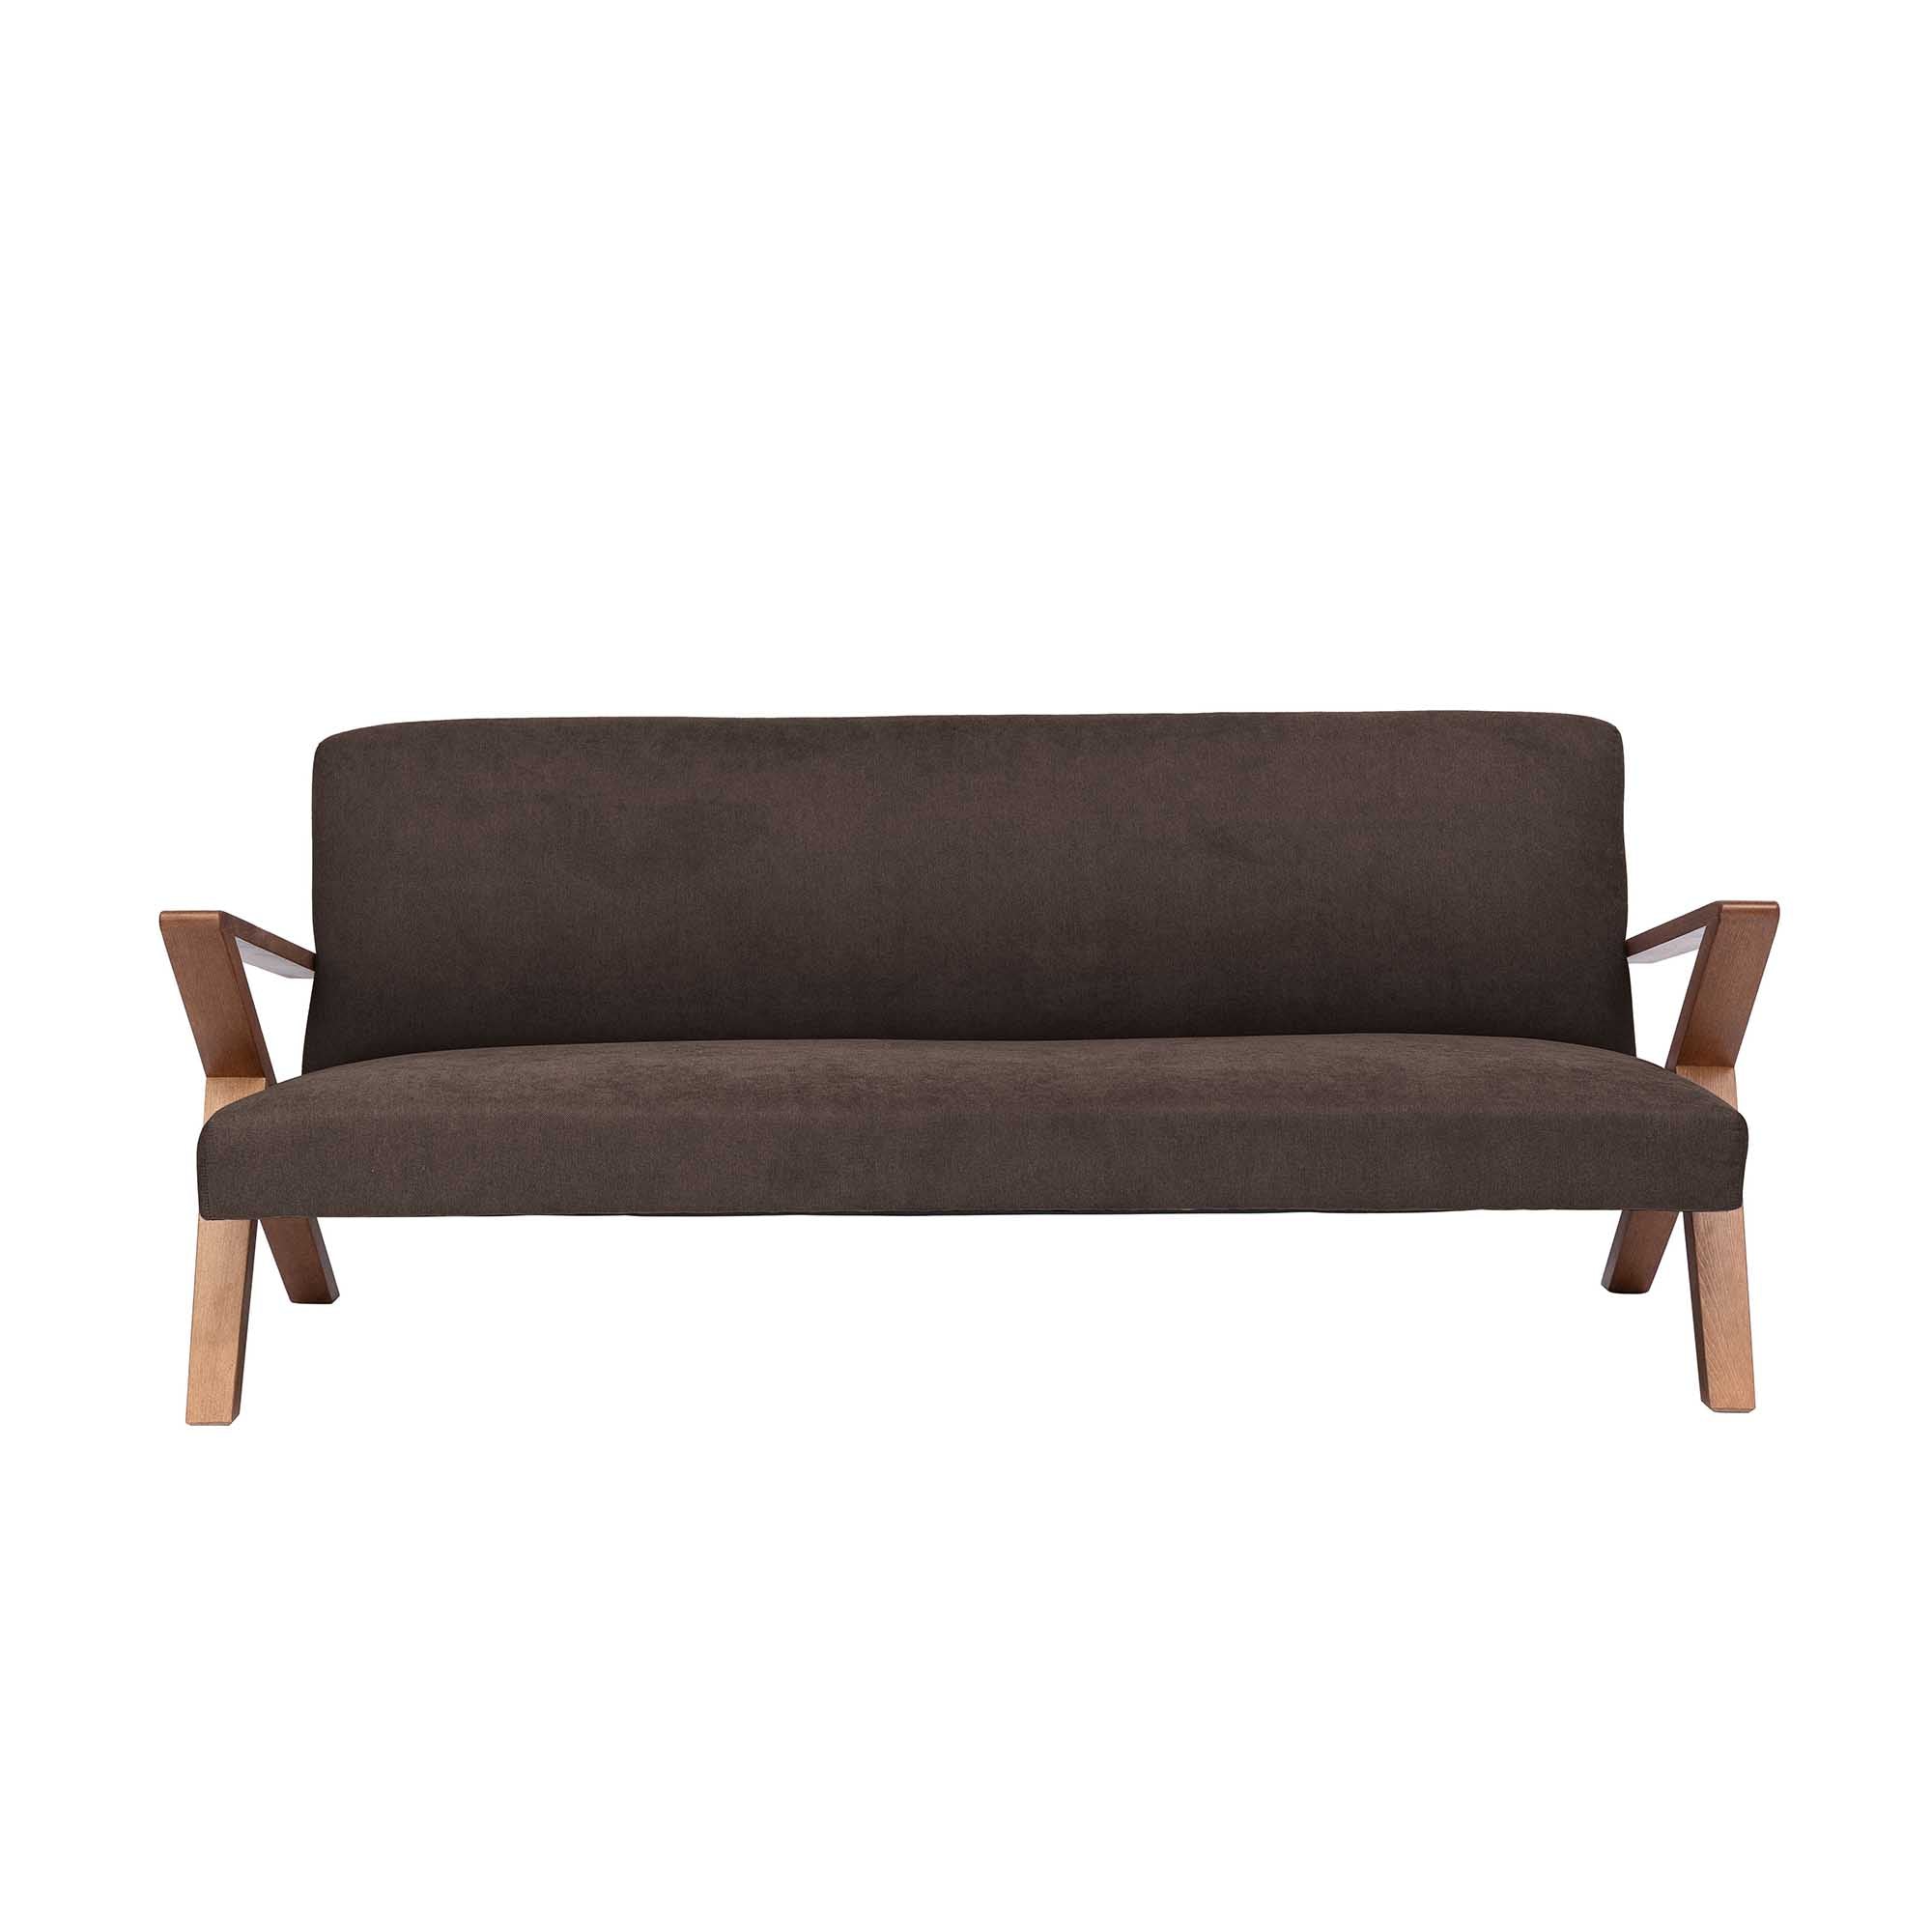  4-seater Sofa Beech Wood Frame, Walnut Colour brown fabric, front view